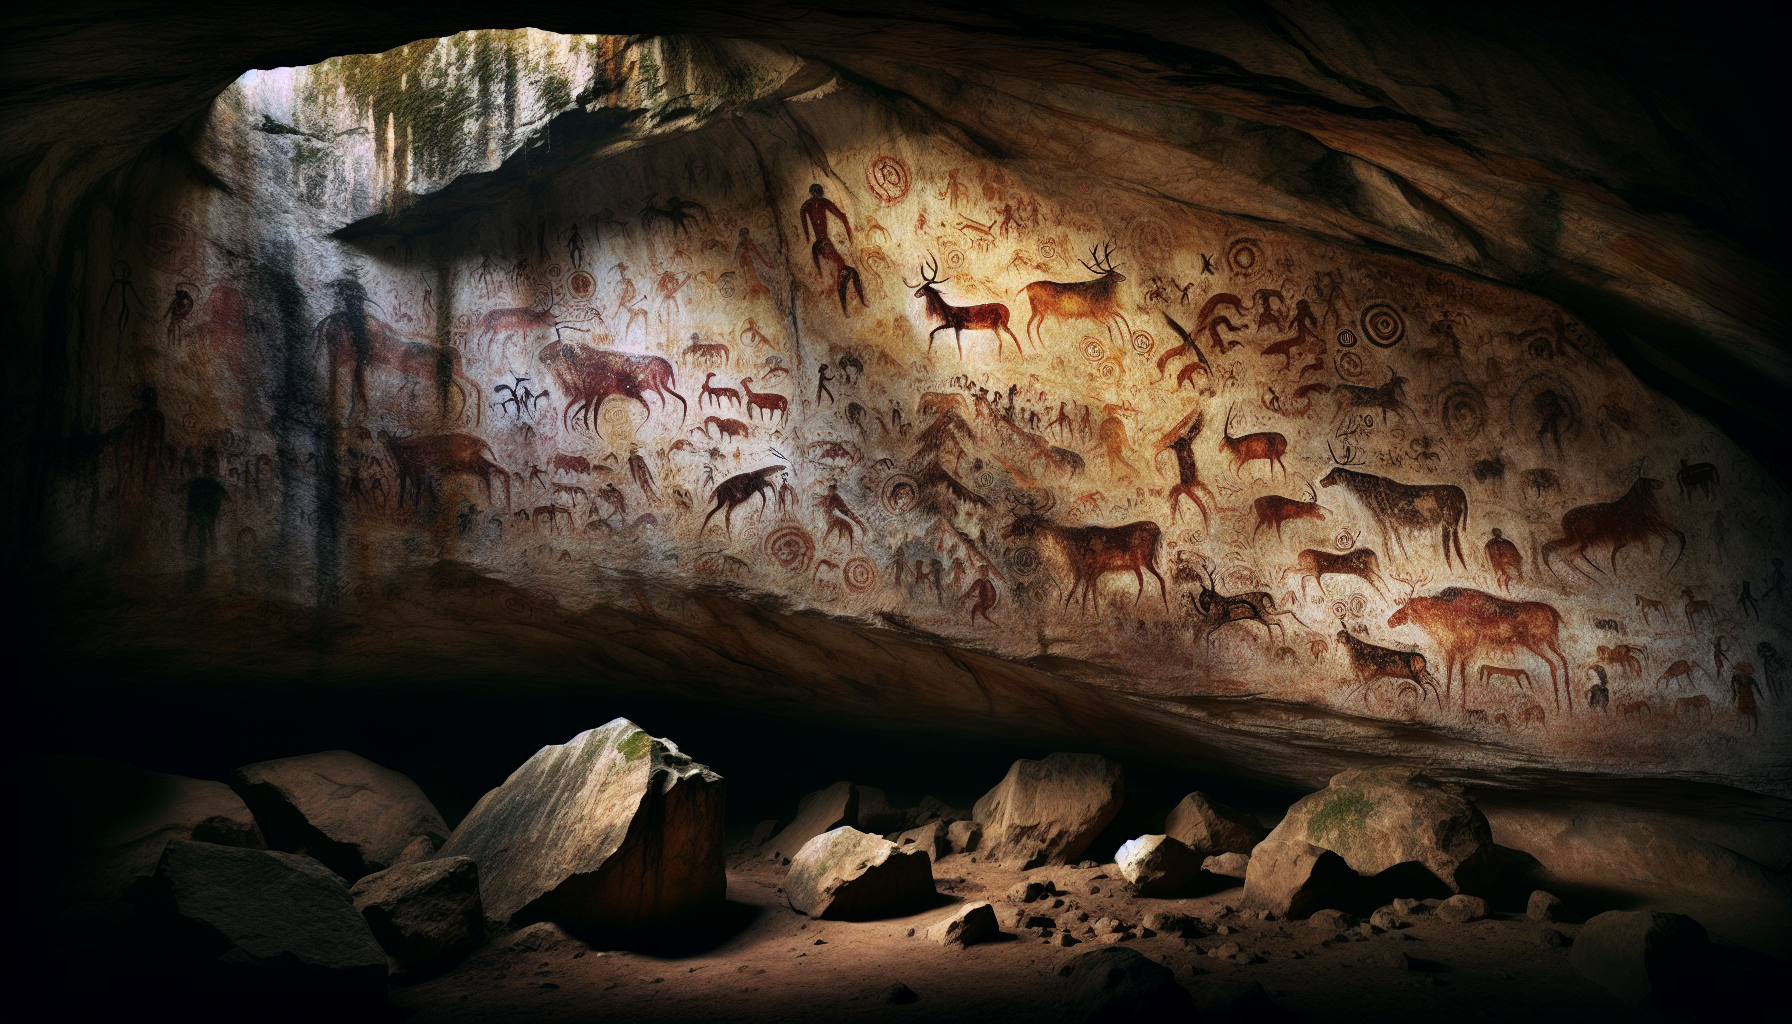 Where Can I Experience Hidden Cave Paintings Or Ancient Petroglyphs?